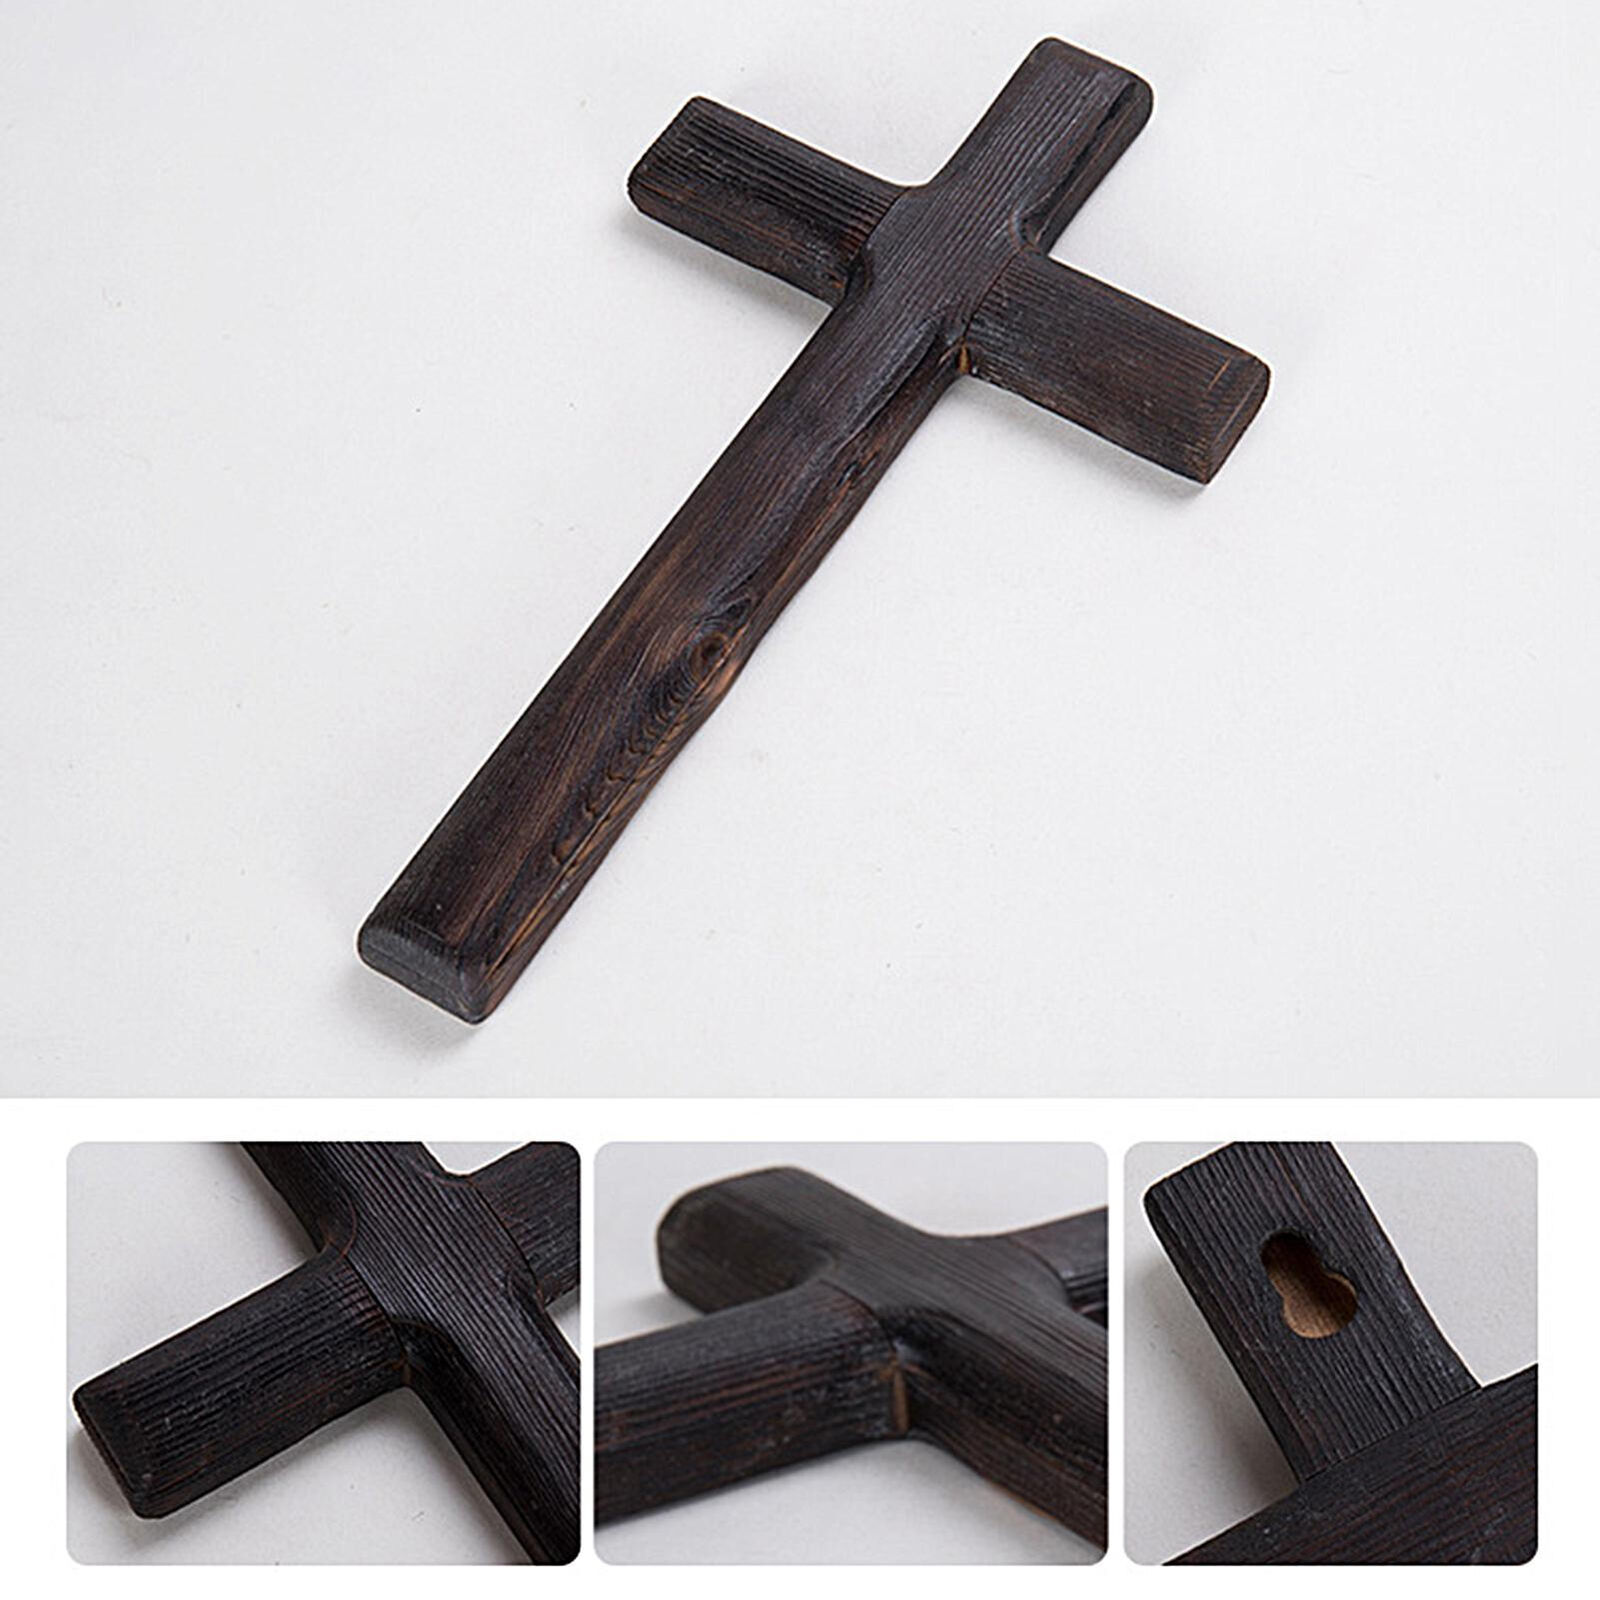 Vintage Wooden Wall Cross Portable Handheld Crucifix Holy Religious-11*6.3 inch